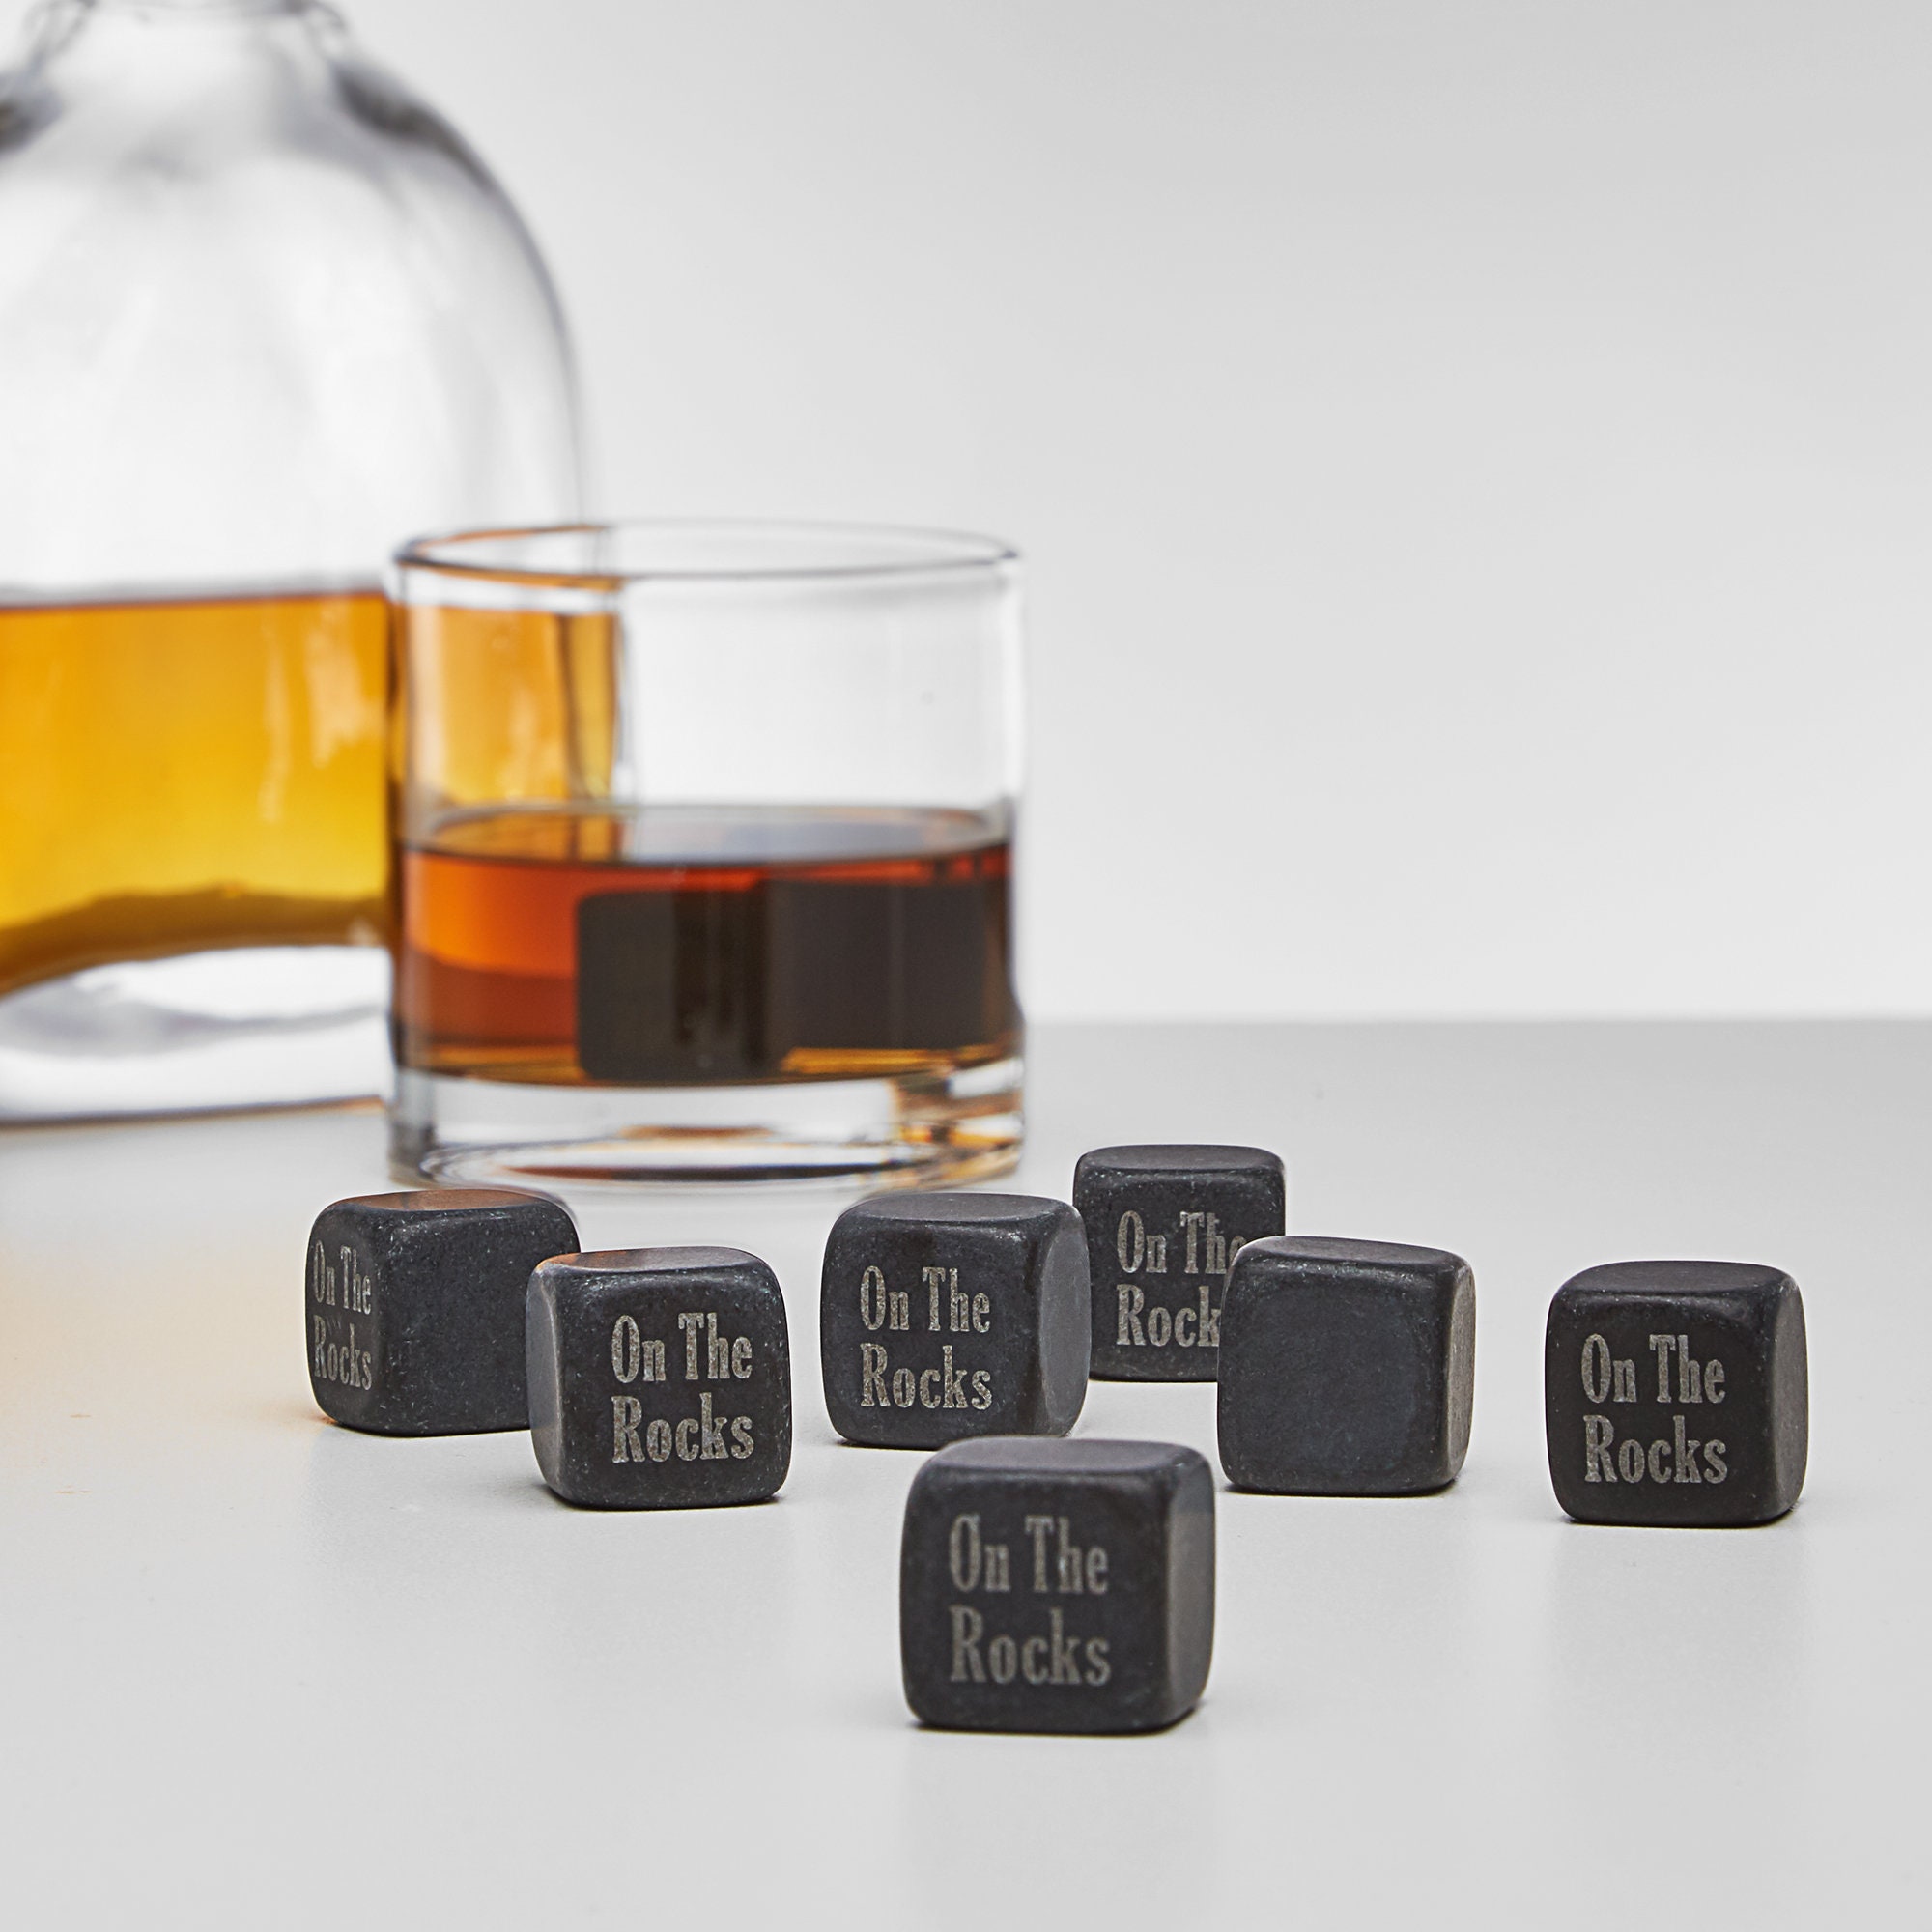 4 Pcs Golf Ball Whiskey Chillers Gifts Set with Box Set Whiskey Ice Hockey  Clip Whiskey Rocks Iced Cubes Chilling Rocks for Birthday Housewarming